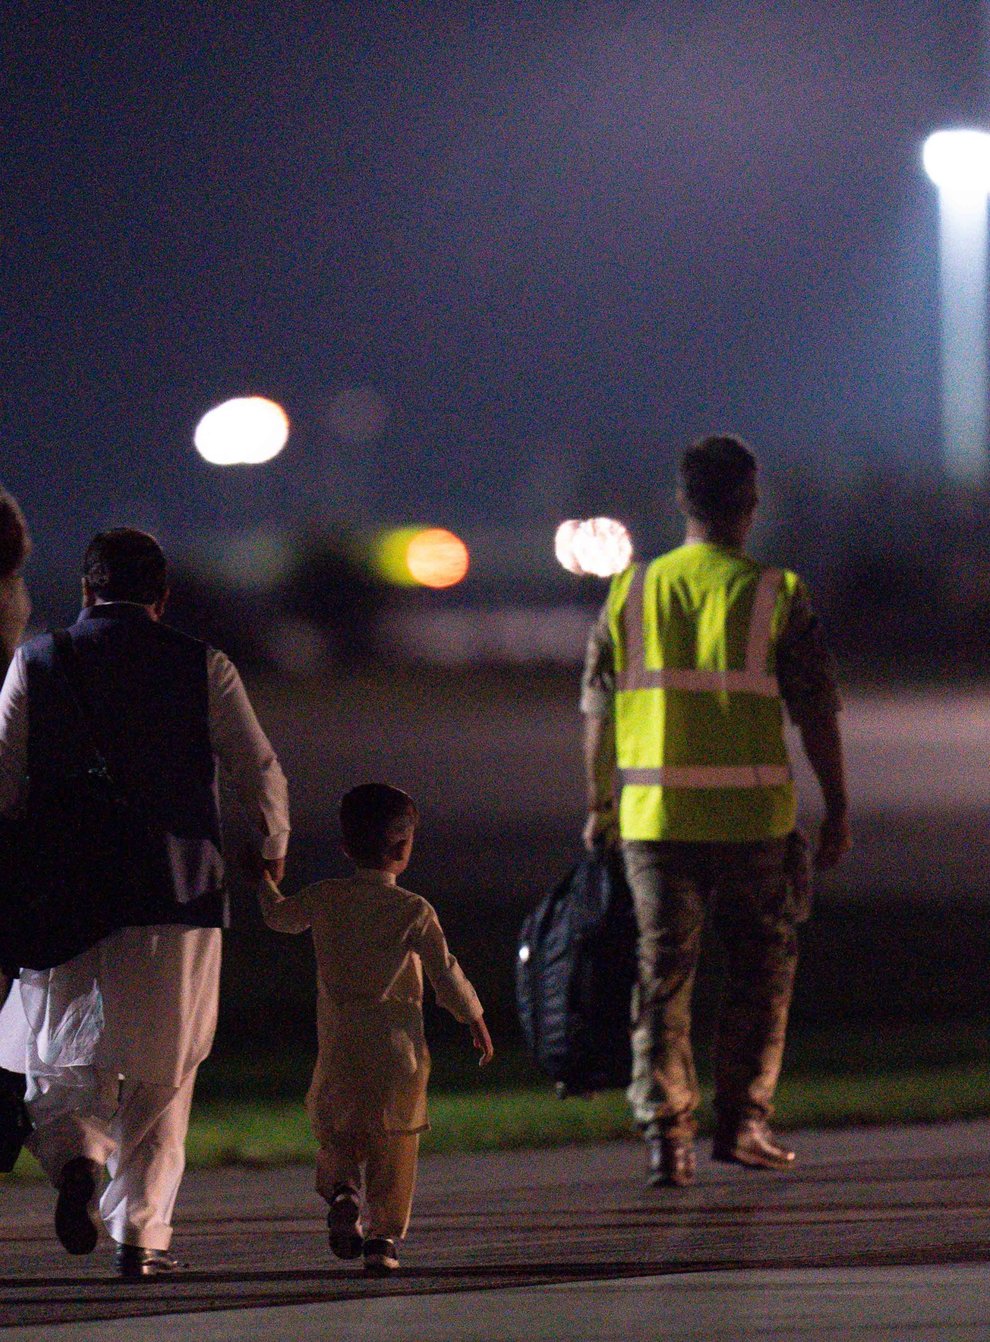 British nationals and Afghan evacuees depart a flight from Afghanistan at RAF Brize Norton (Jacob King/PA)